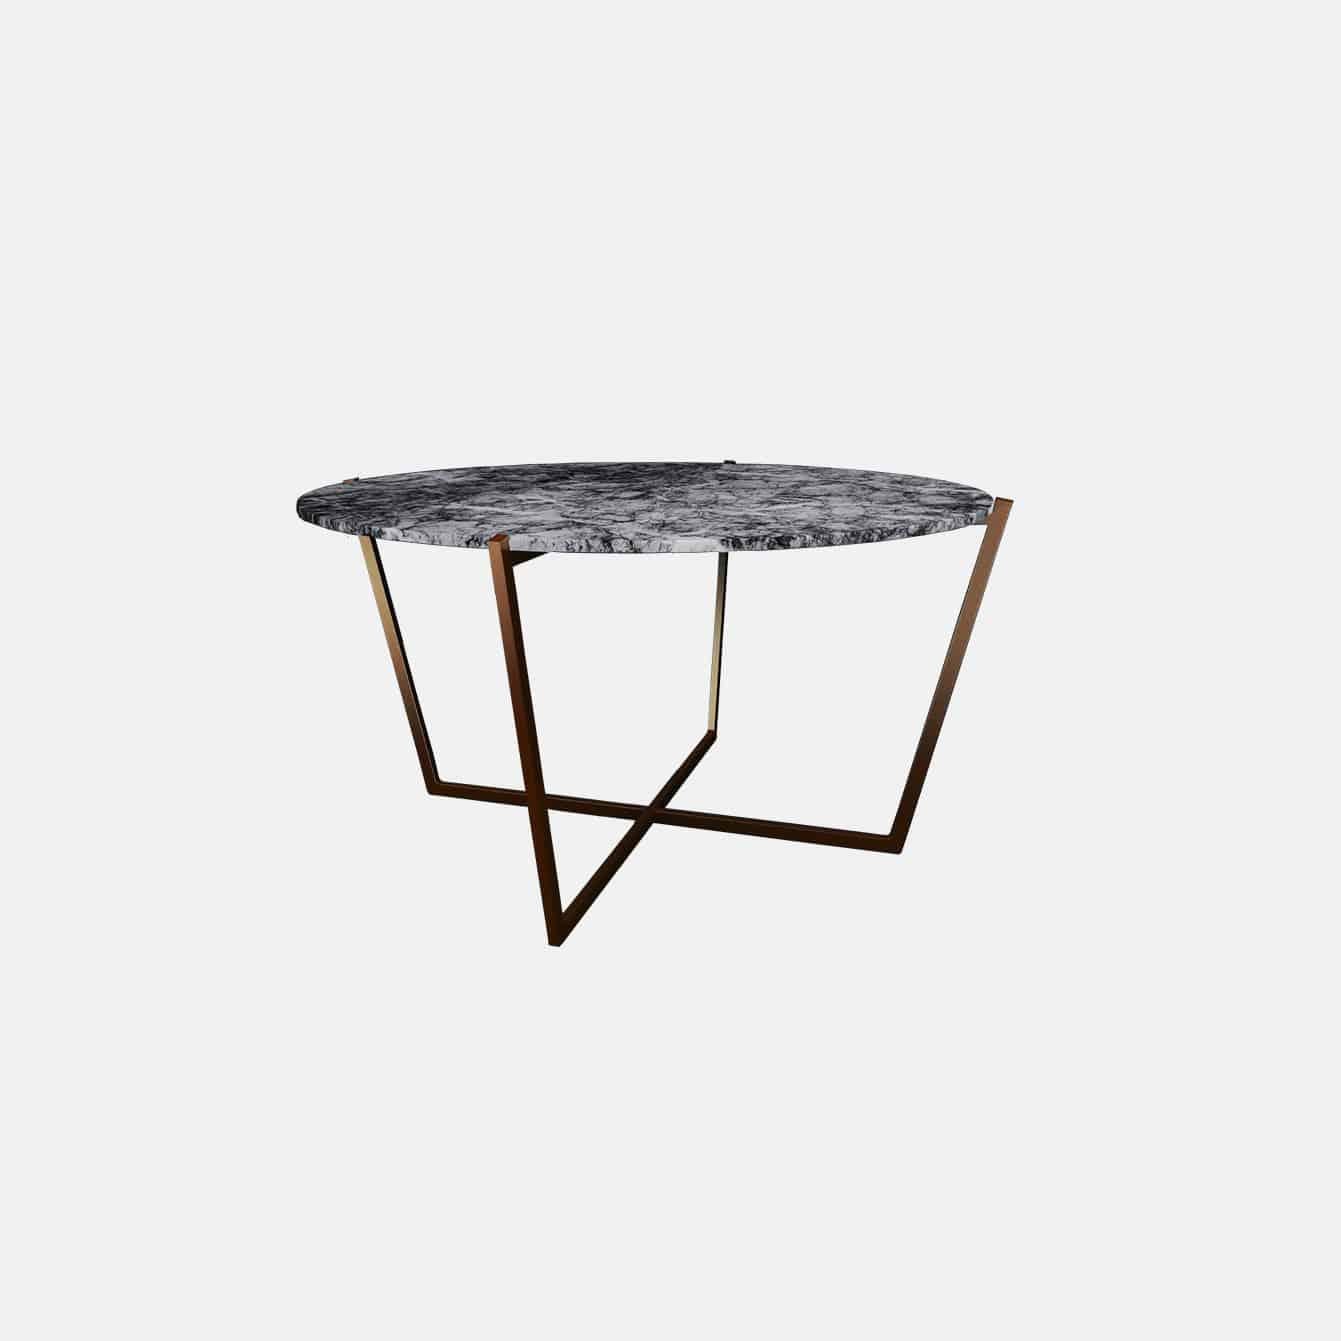 Chinese NORDST EMMA Dining Table, Italian Black Eagle Marble, Danish Modern Design, New For Sale